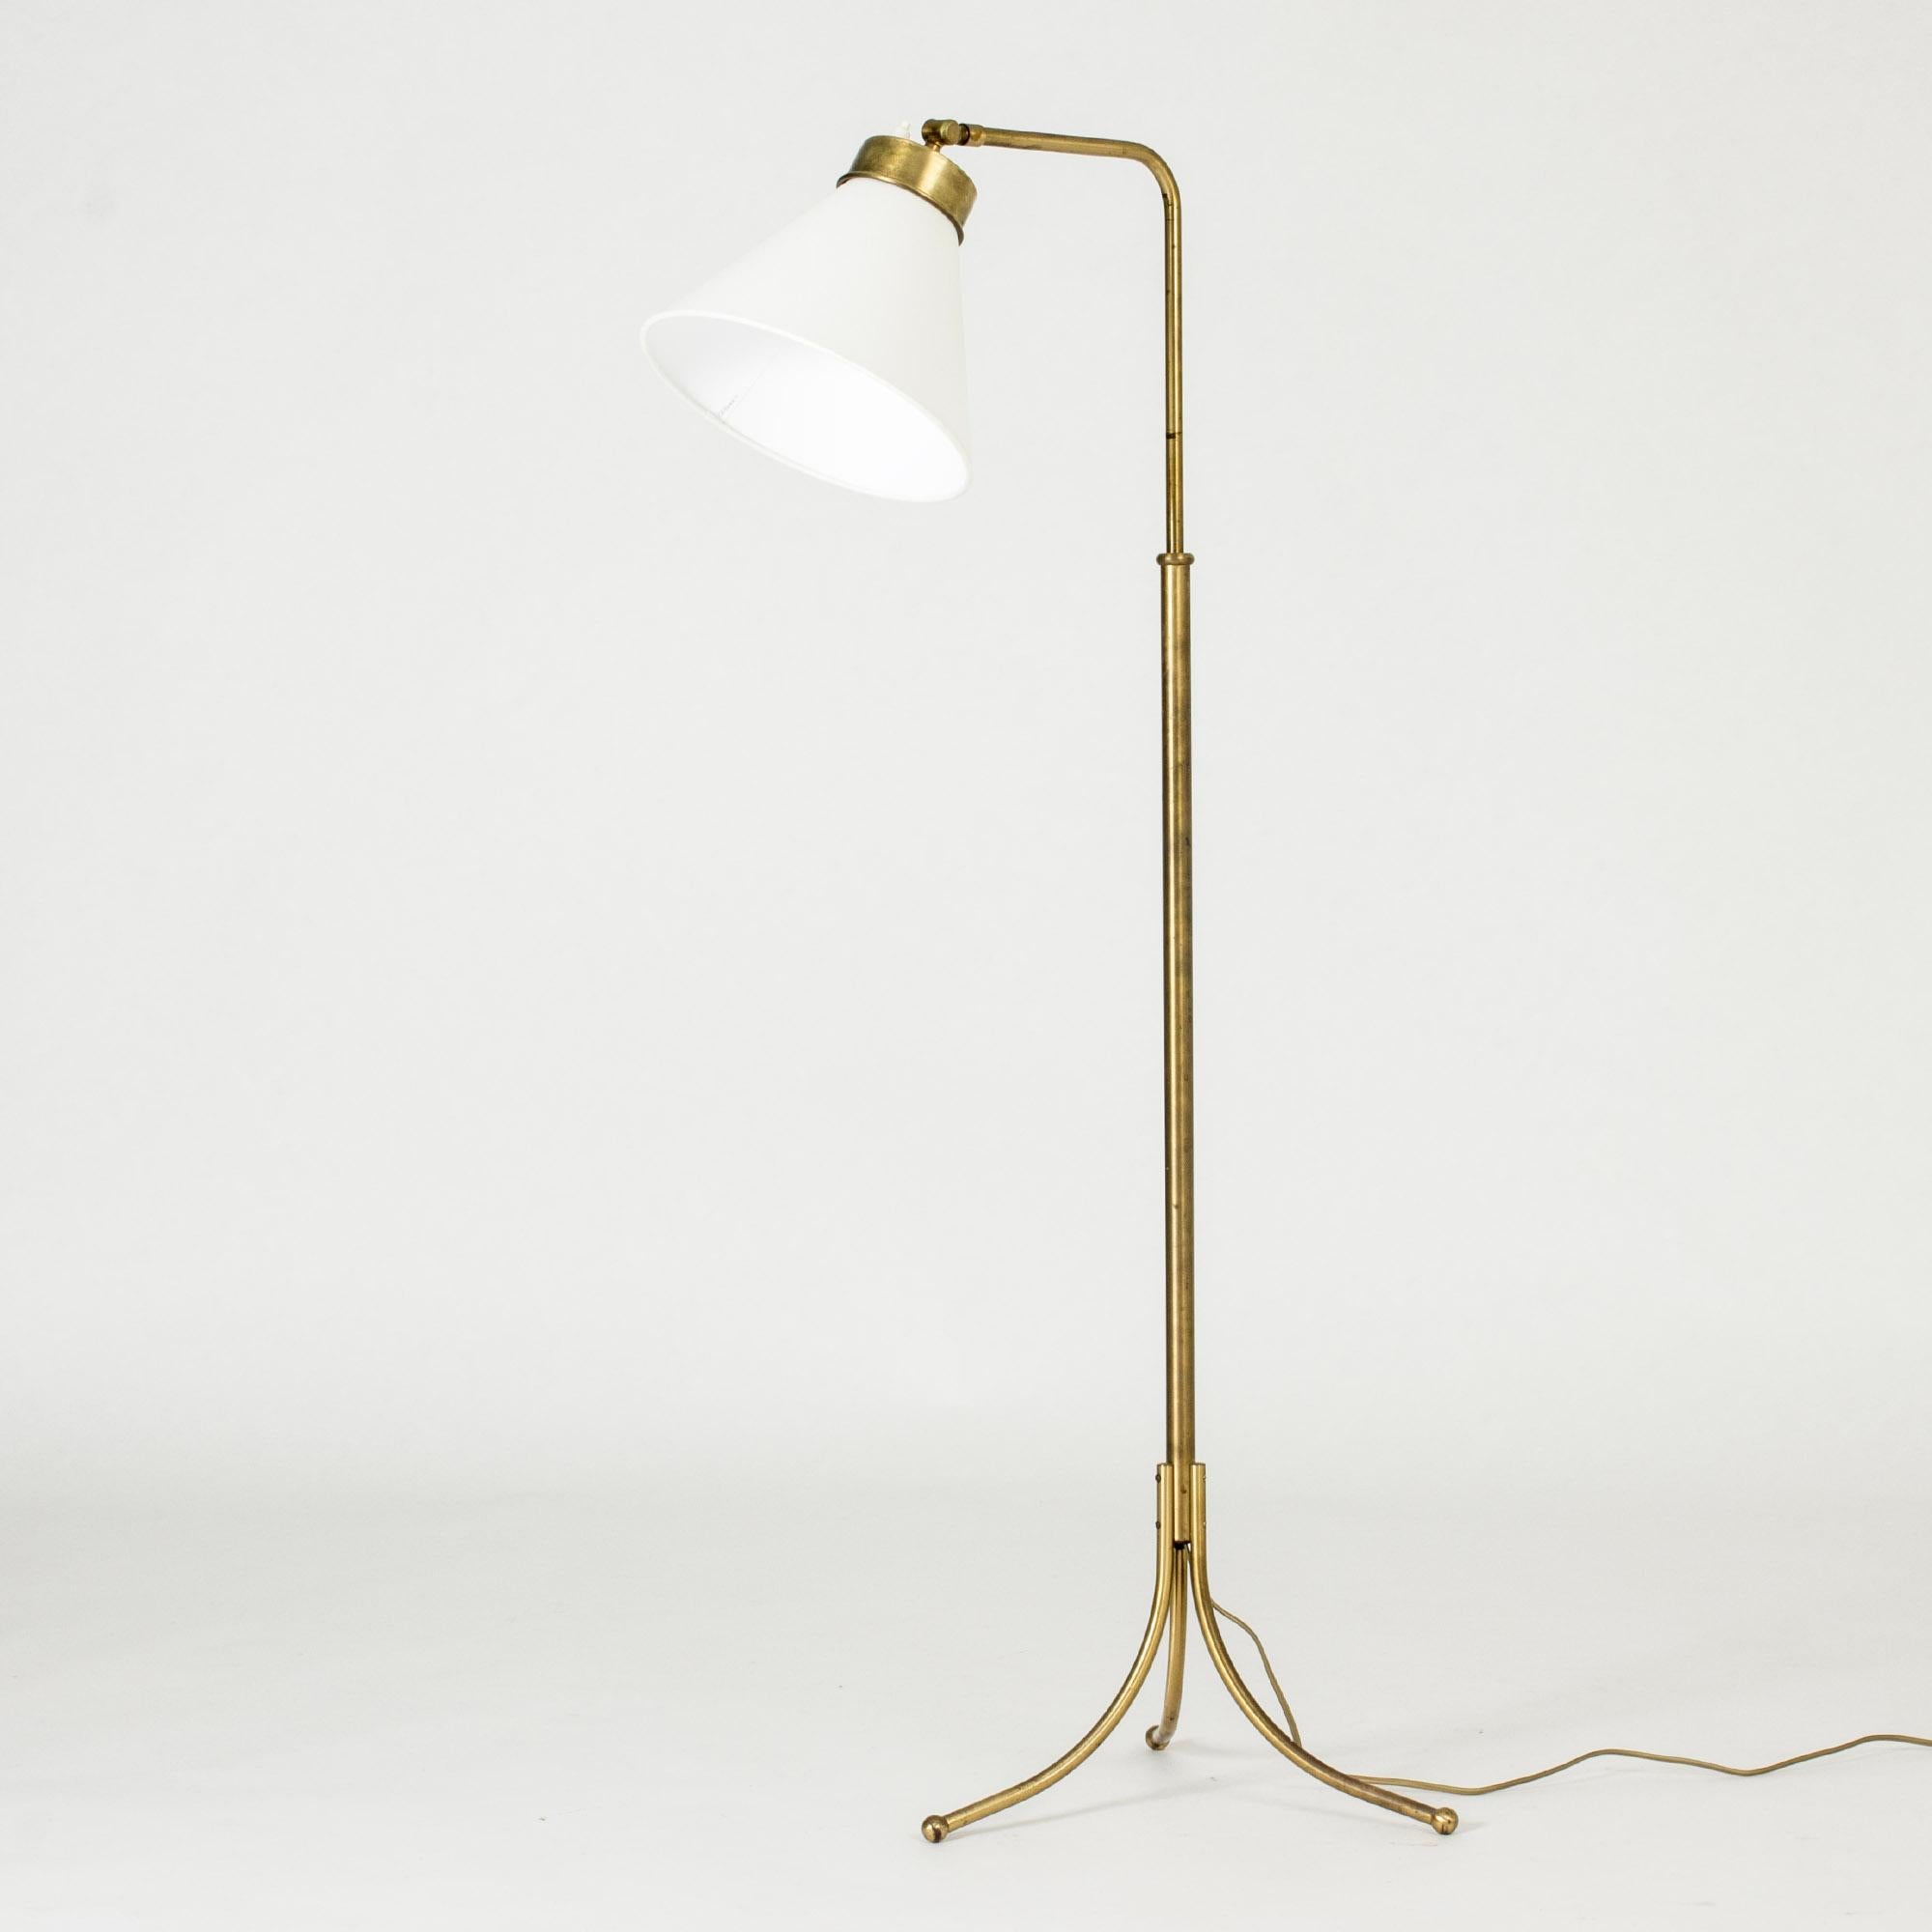 Brass floor lamp by Josef Frank, model 1842. Designed in 1932. Slender stem with nicely curved tripod base, with balls at the ends.

Height 97-141 cm.

About Josef Frank: 
Josef Frank was an Austrian-born architect and designer known for his